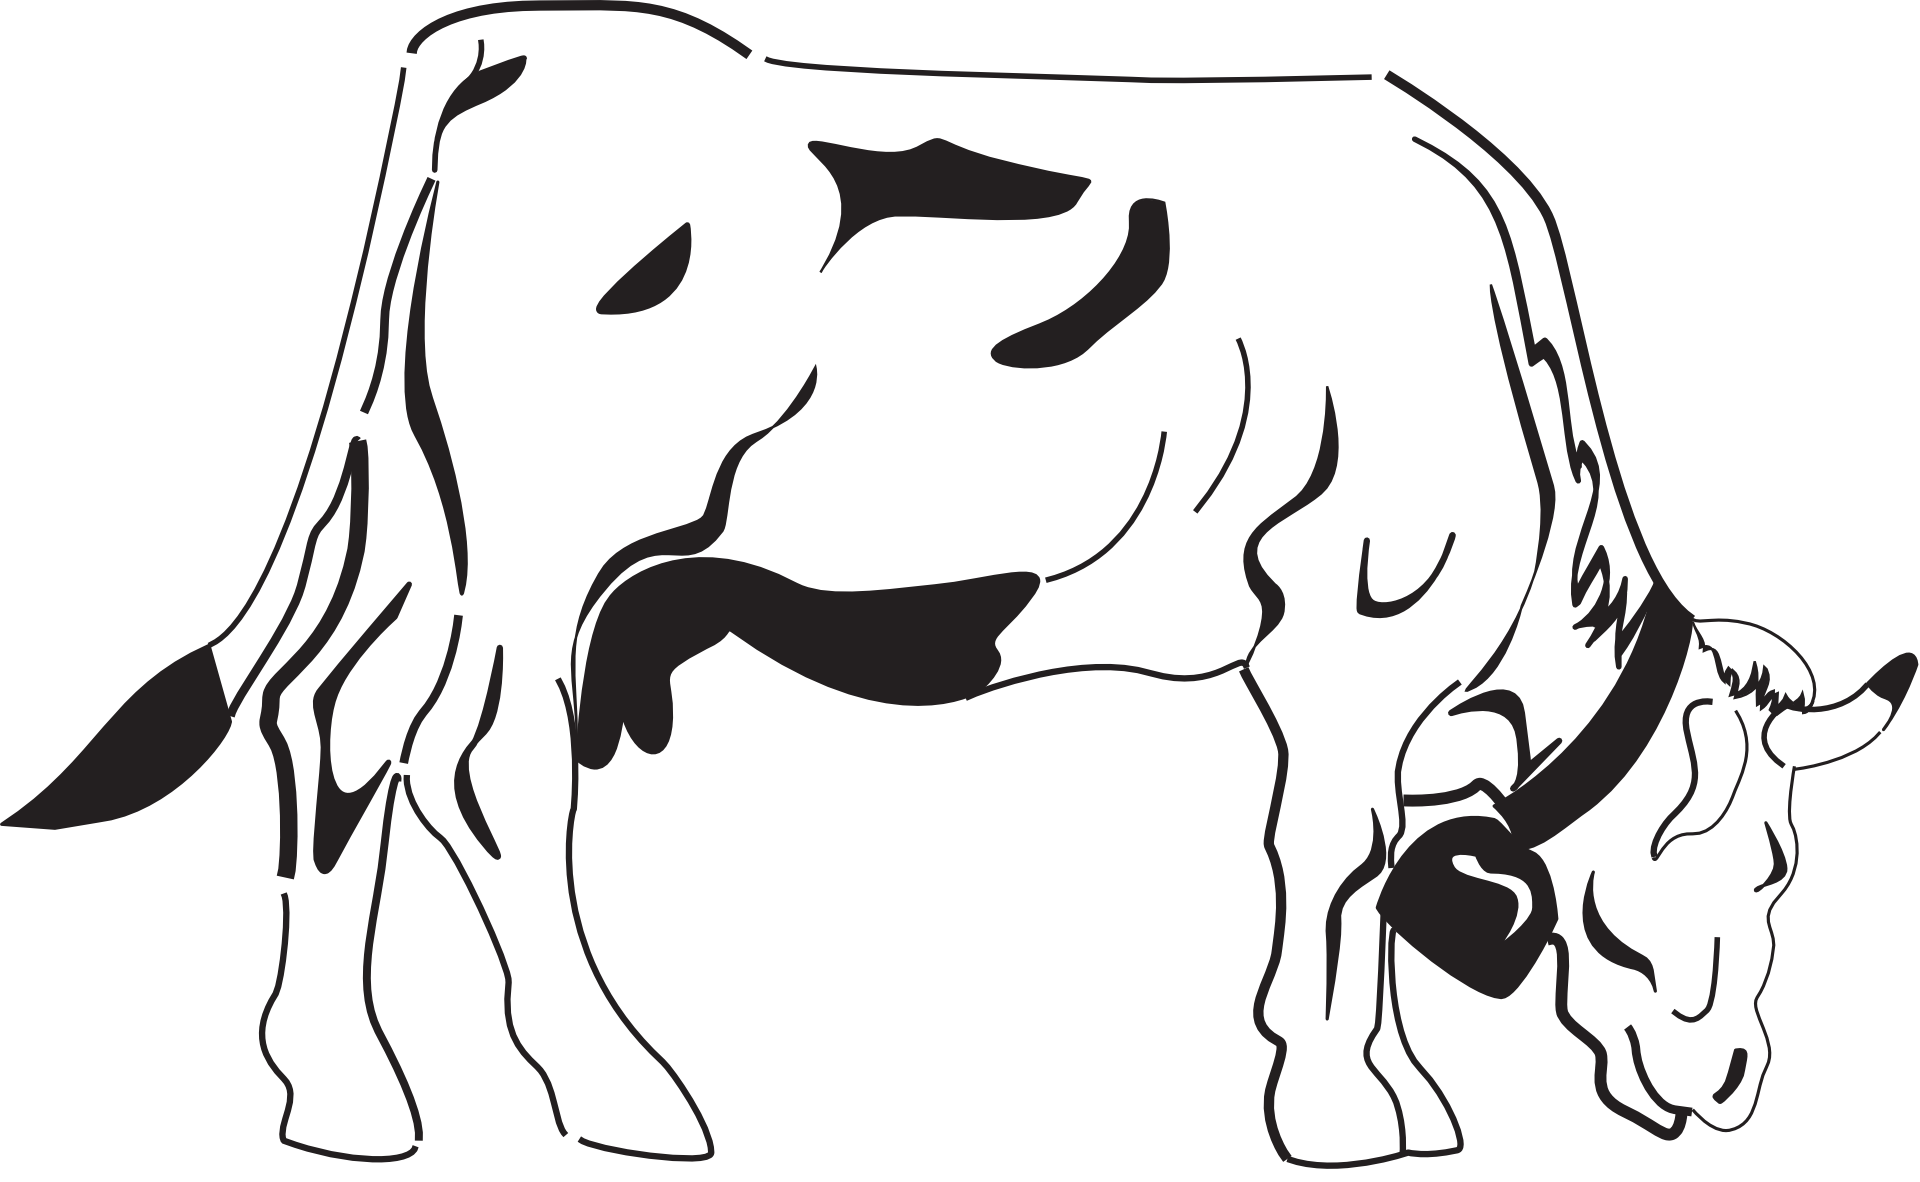 Cow on the grazing clipart free image